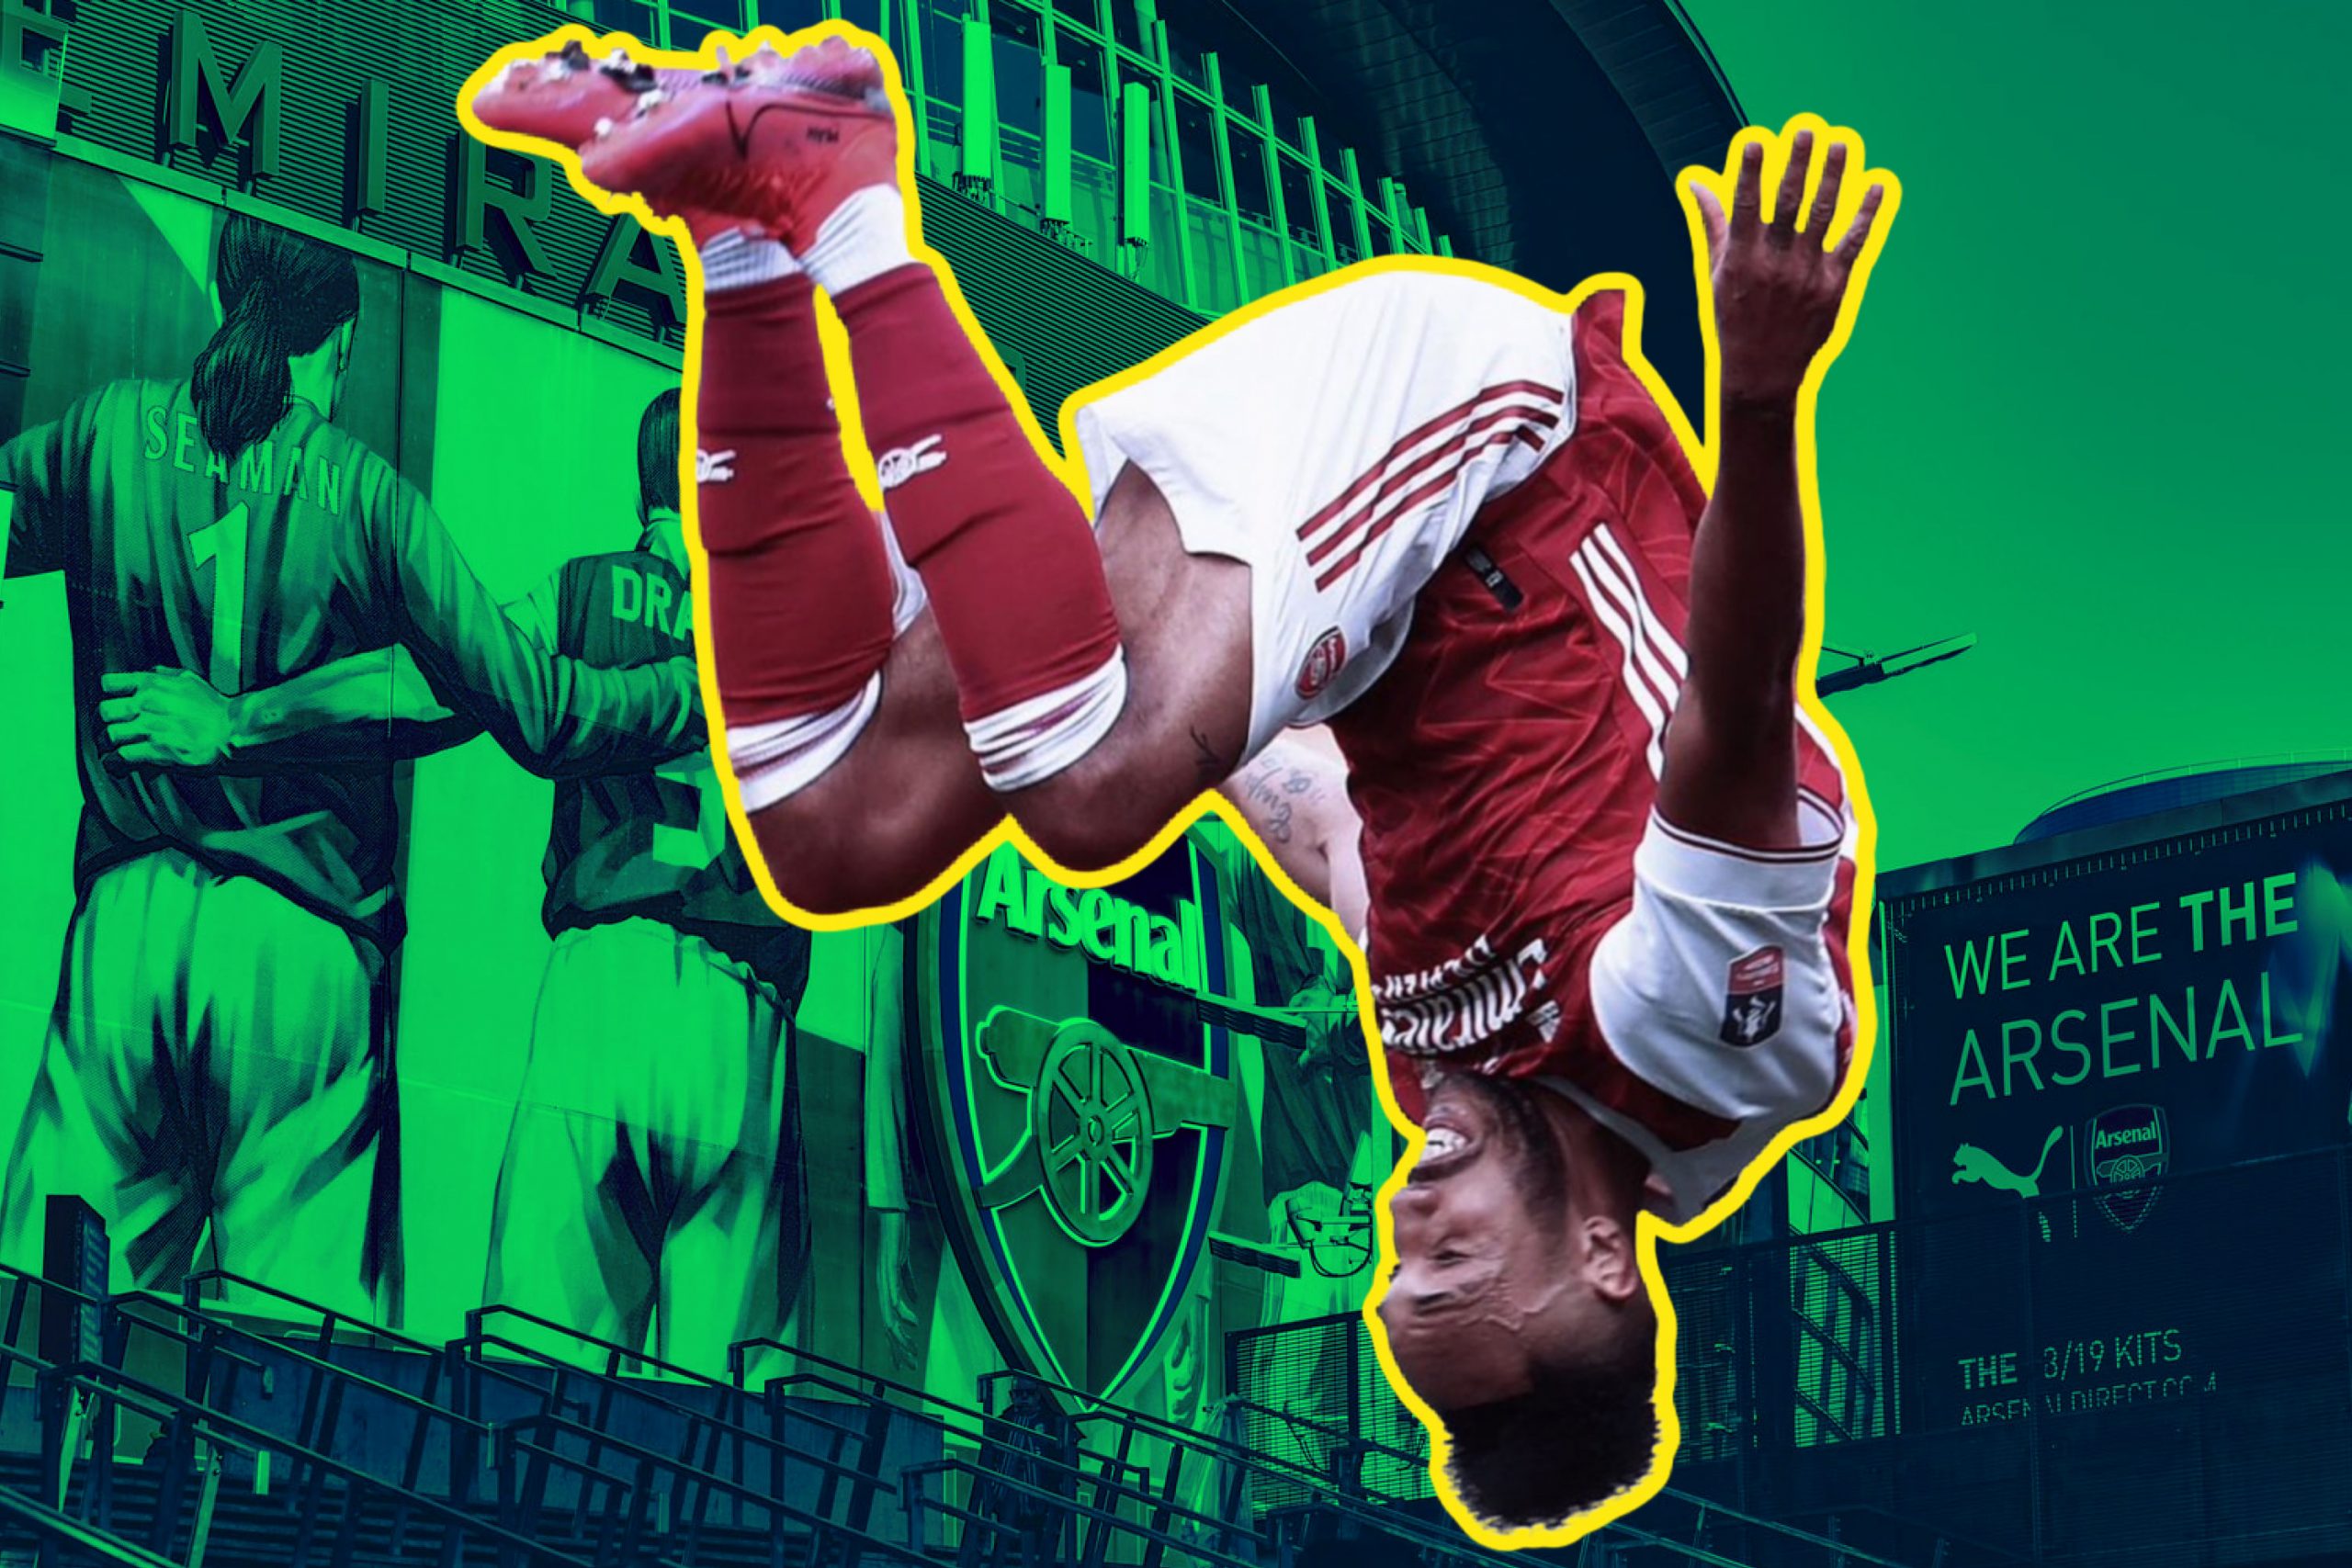 Aubameyang celebrating a goal by going upside down